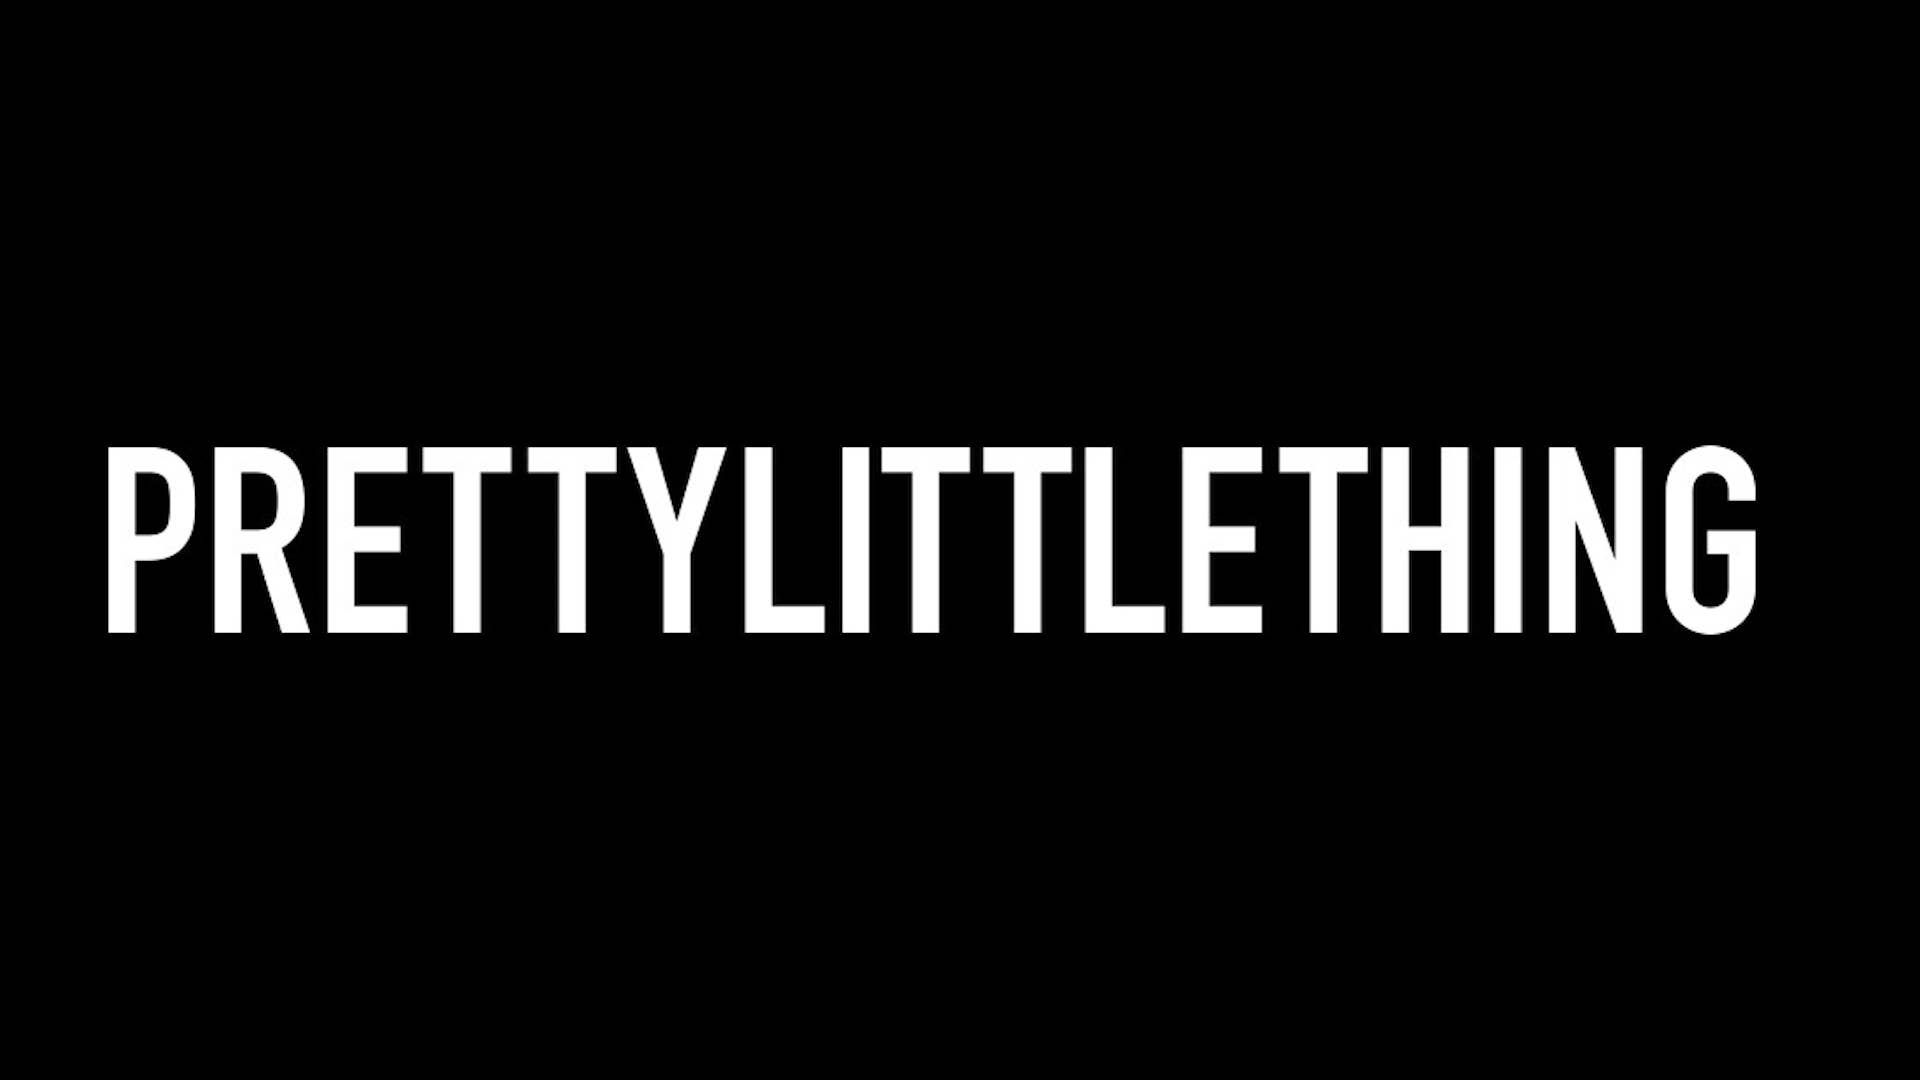 Fashion Brand Pretty Little Thing Faces Backlash Over 'Stand